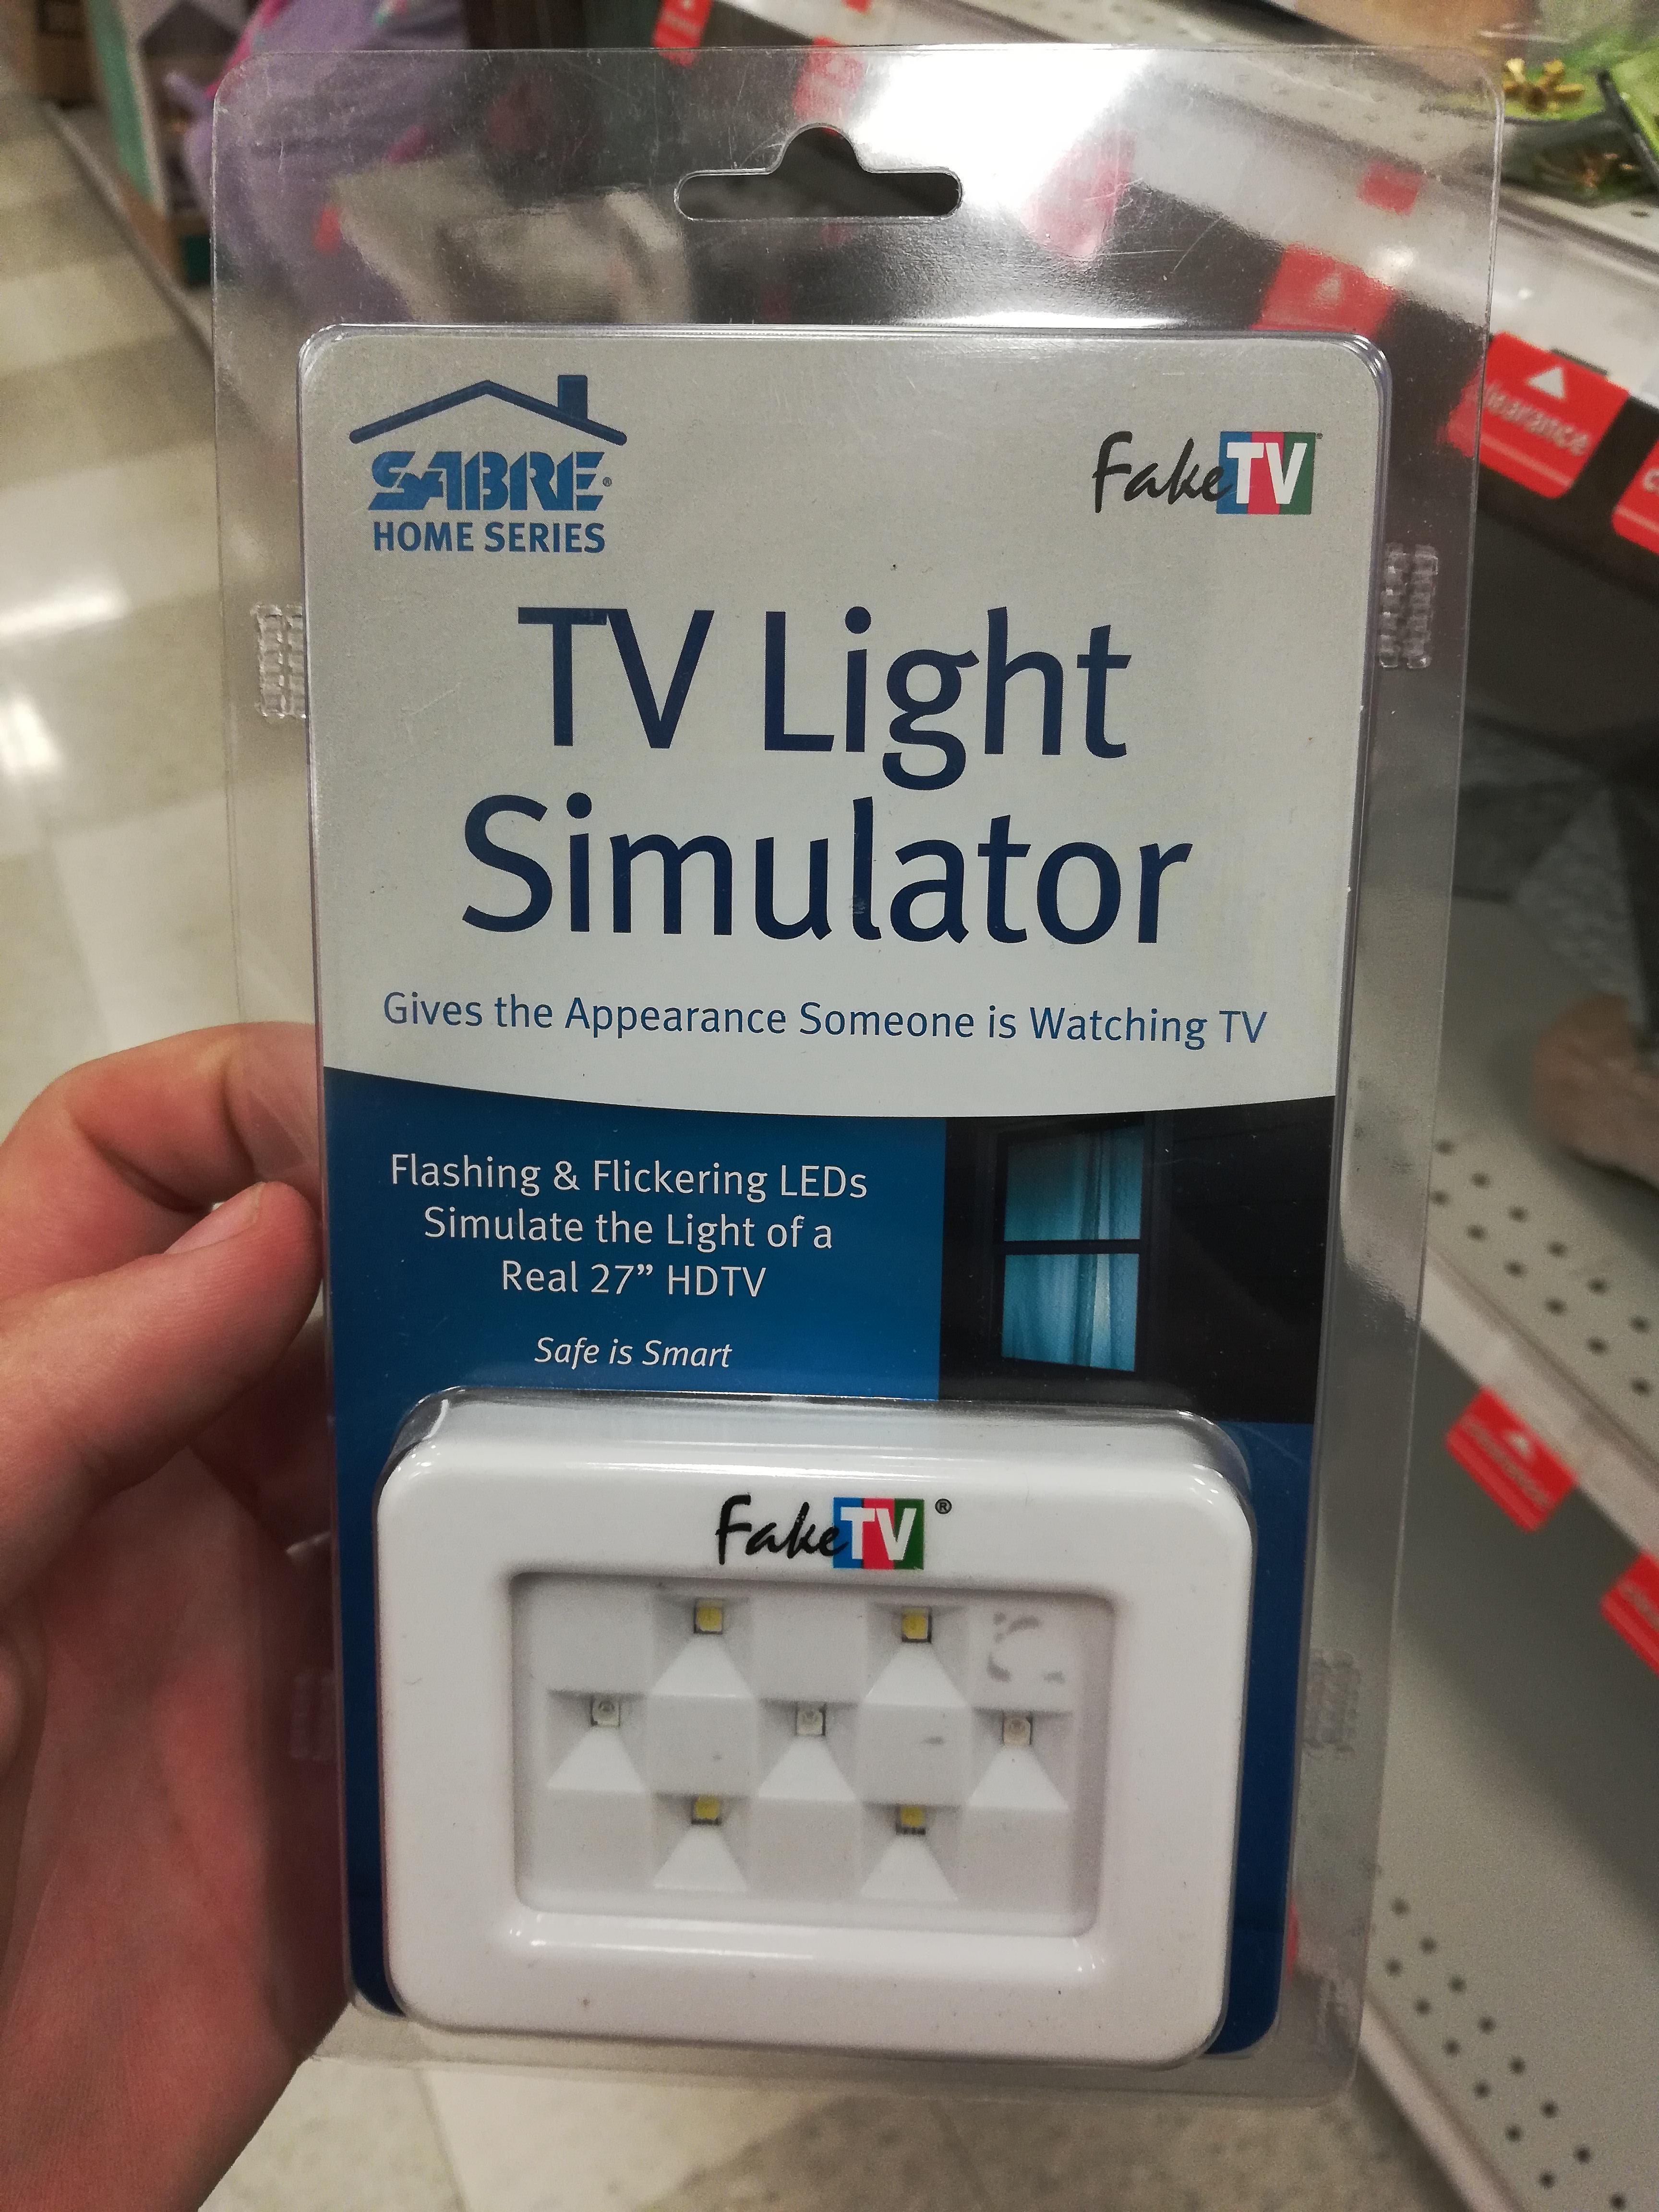 tv light simulator - Sabre Home Series Tv Light Simulator Gives the Appearance Someone is Watching Tv Flashing & Flickering LEDs Simulate the Light of a Real 27" Hdtv Safe is Smart Fake Tv Fake Tv Bonny .......